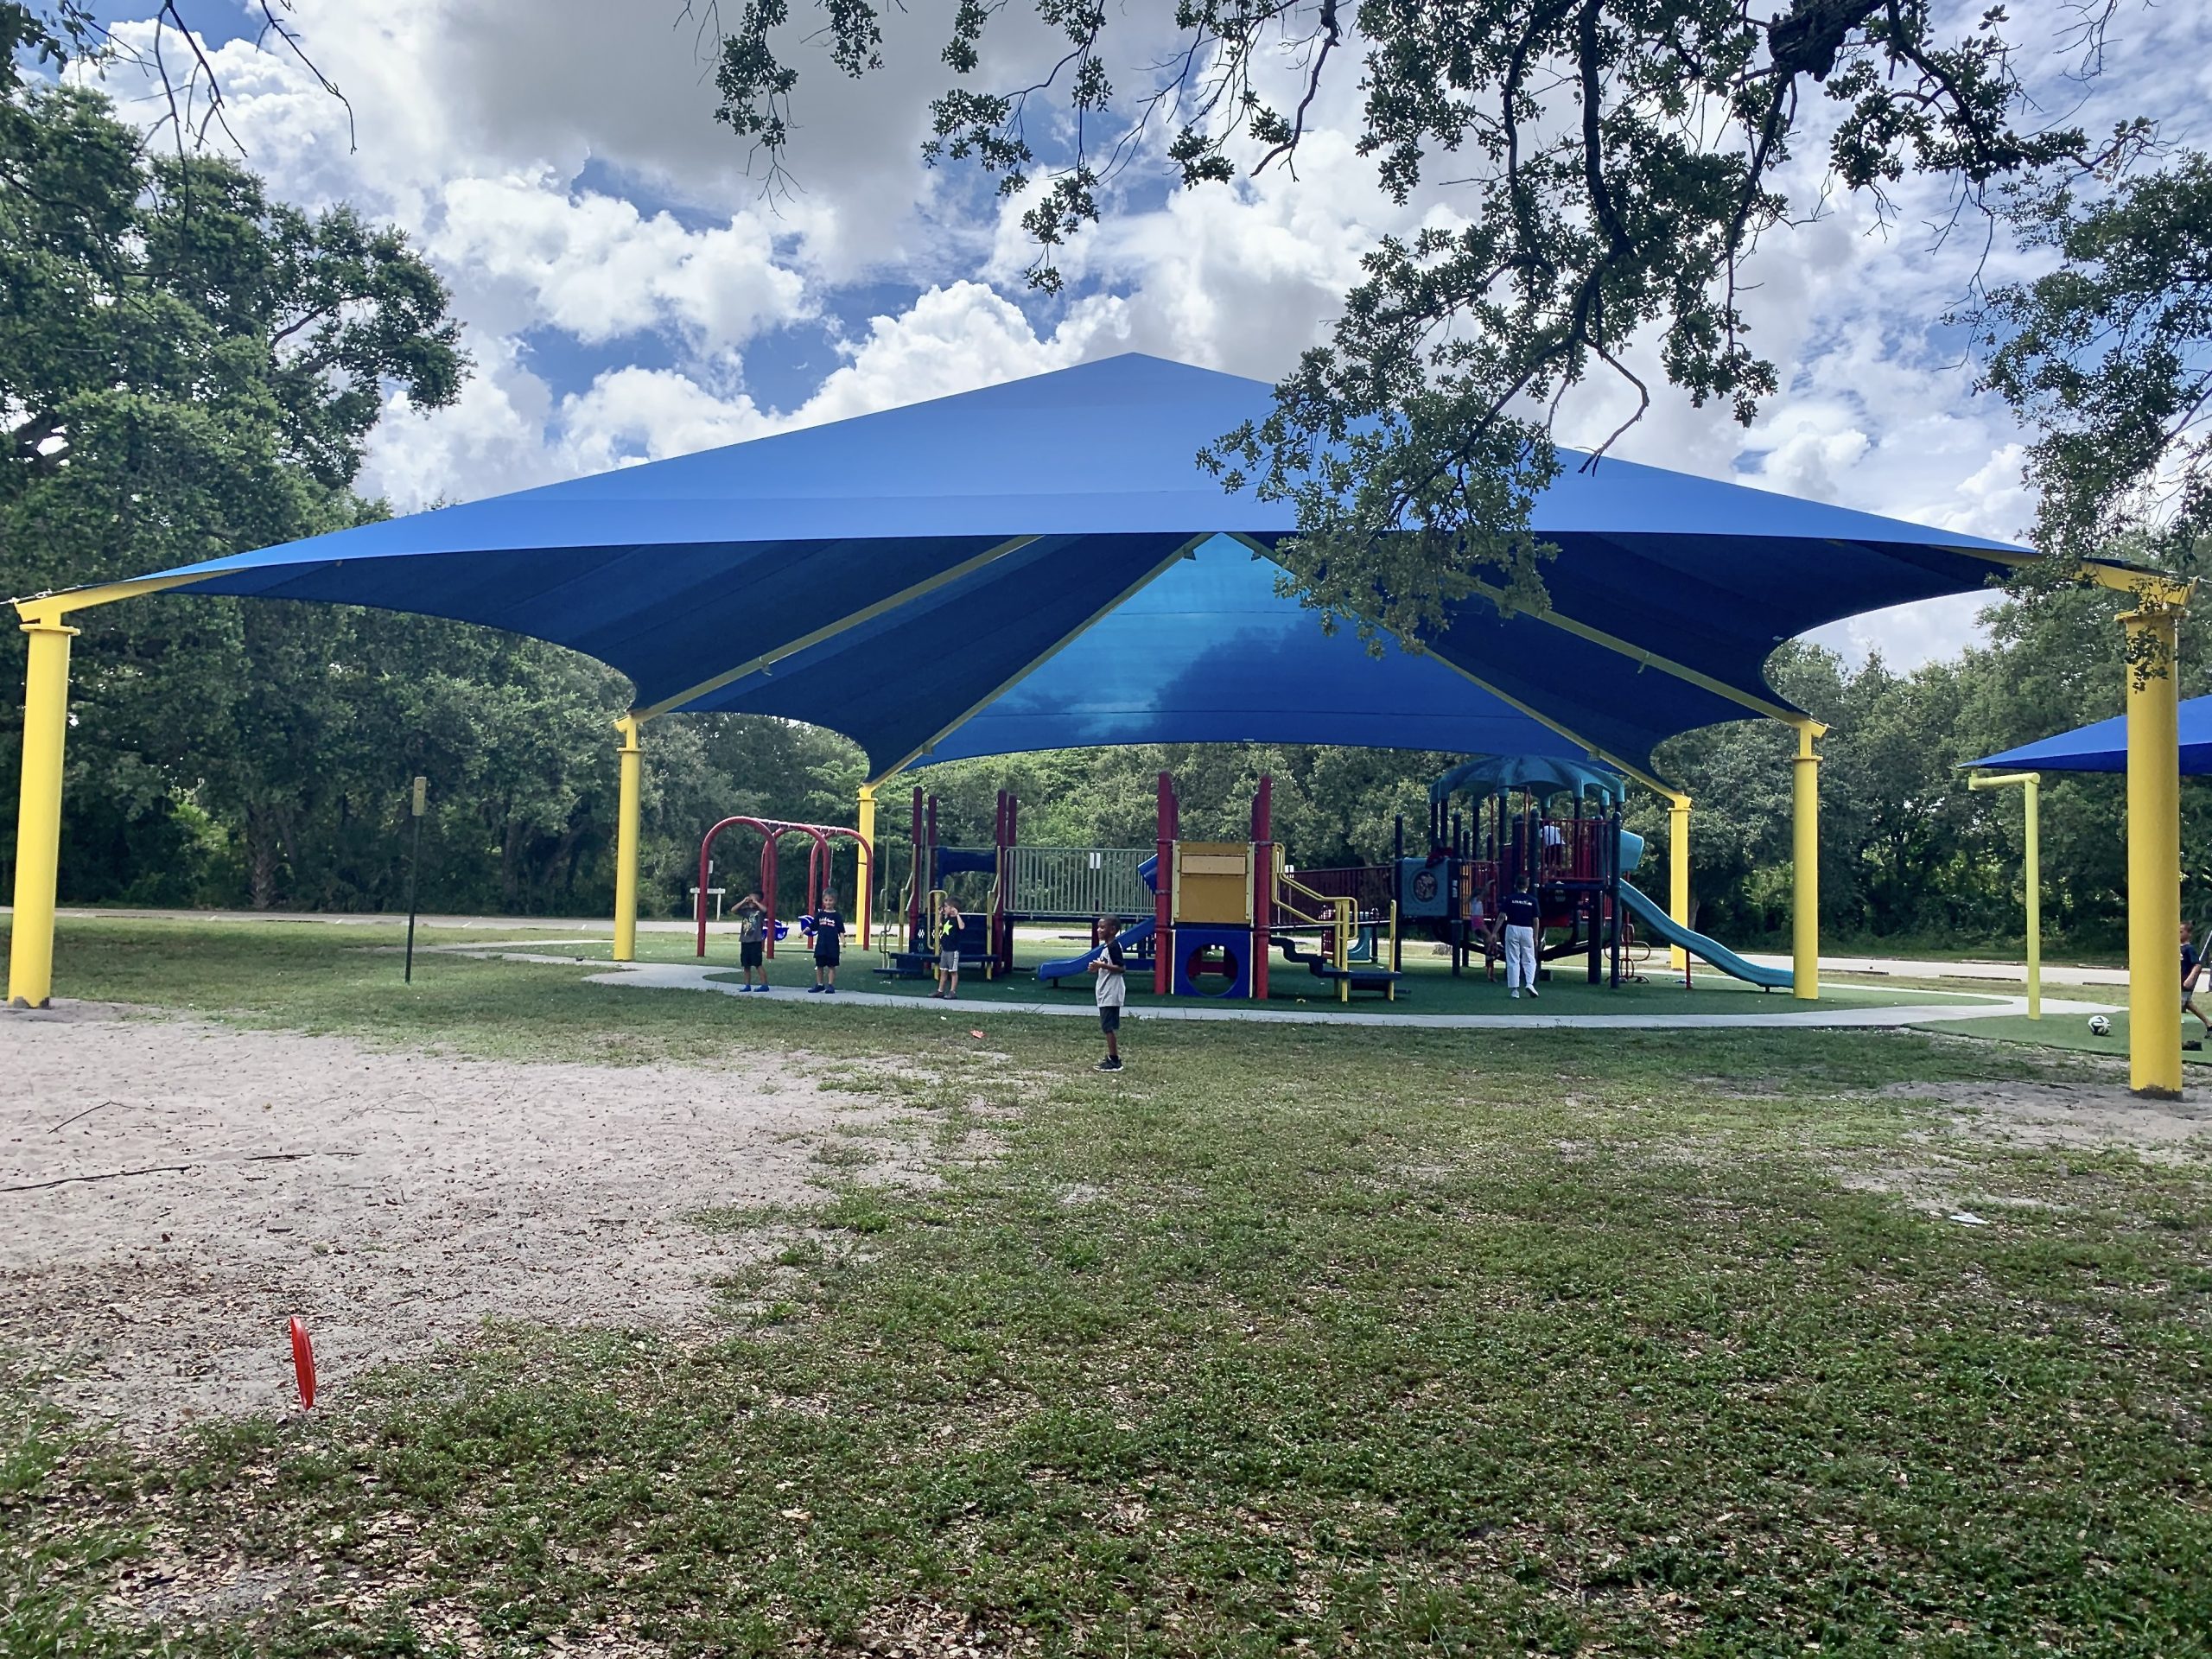 Shade Structure over a playground at the park